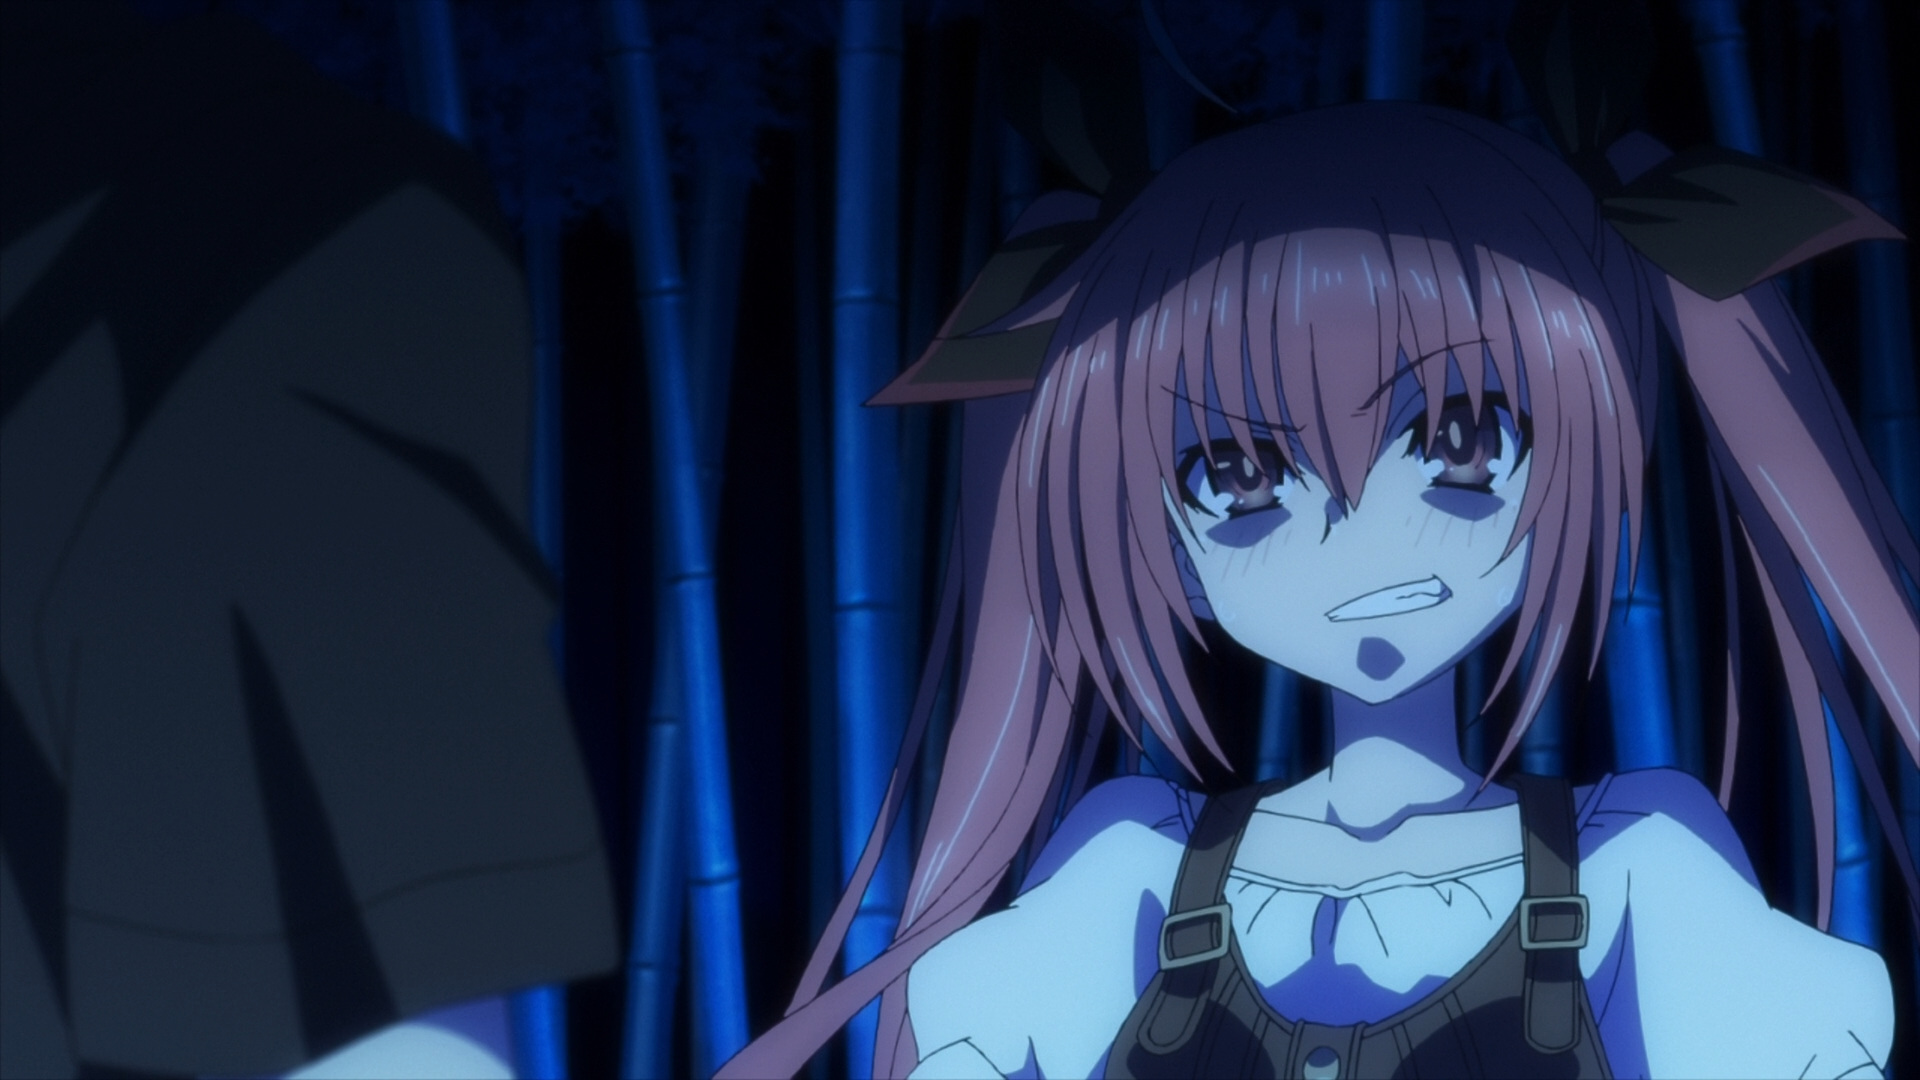 Moving forward, there’s plenty more Date A Live to come here. 